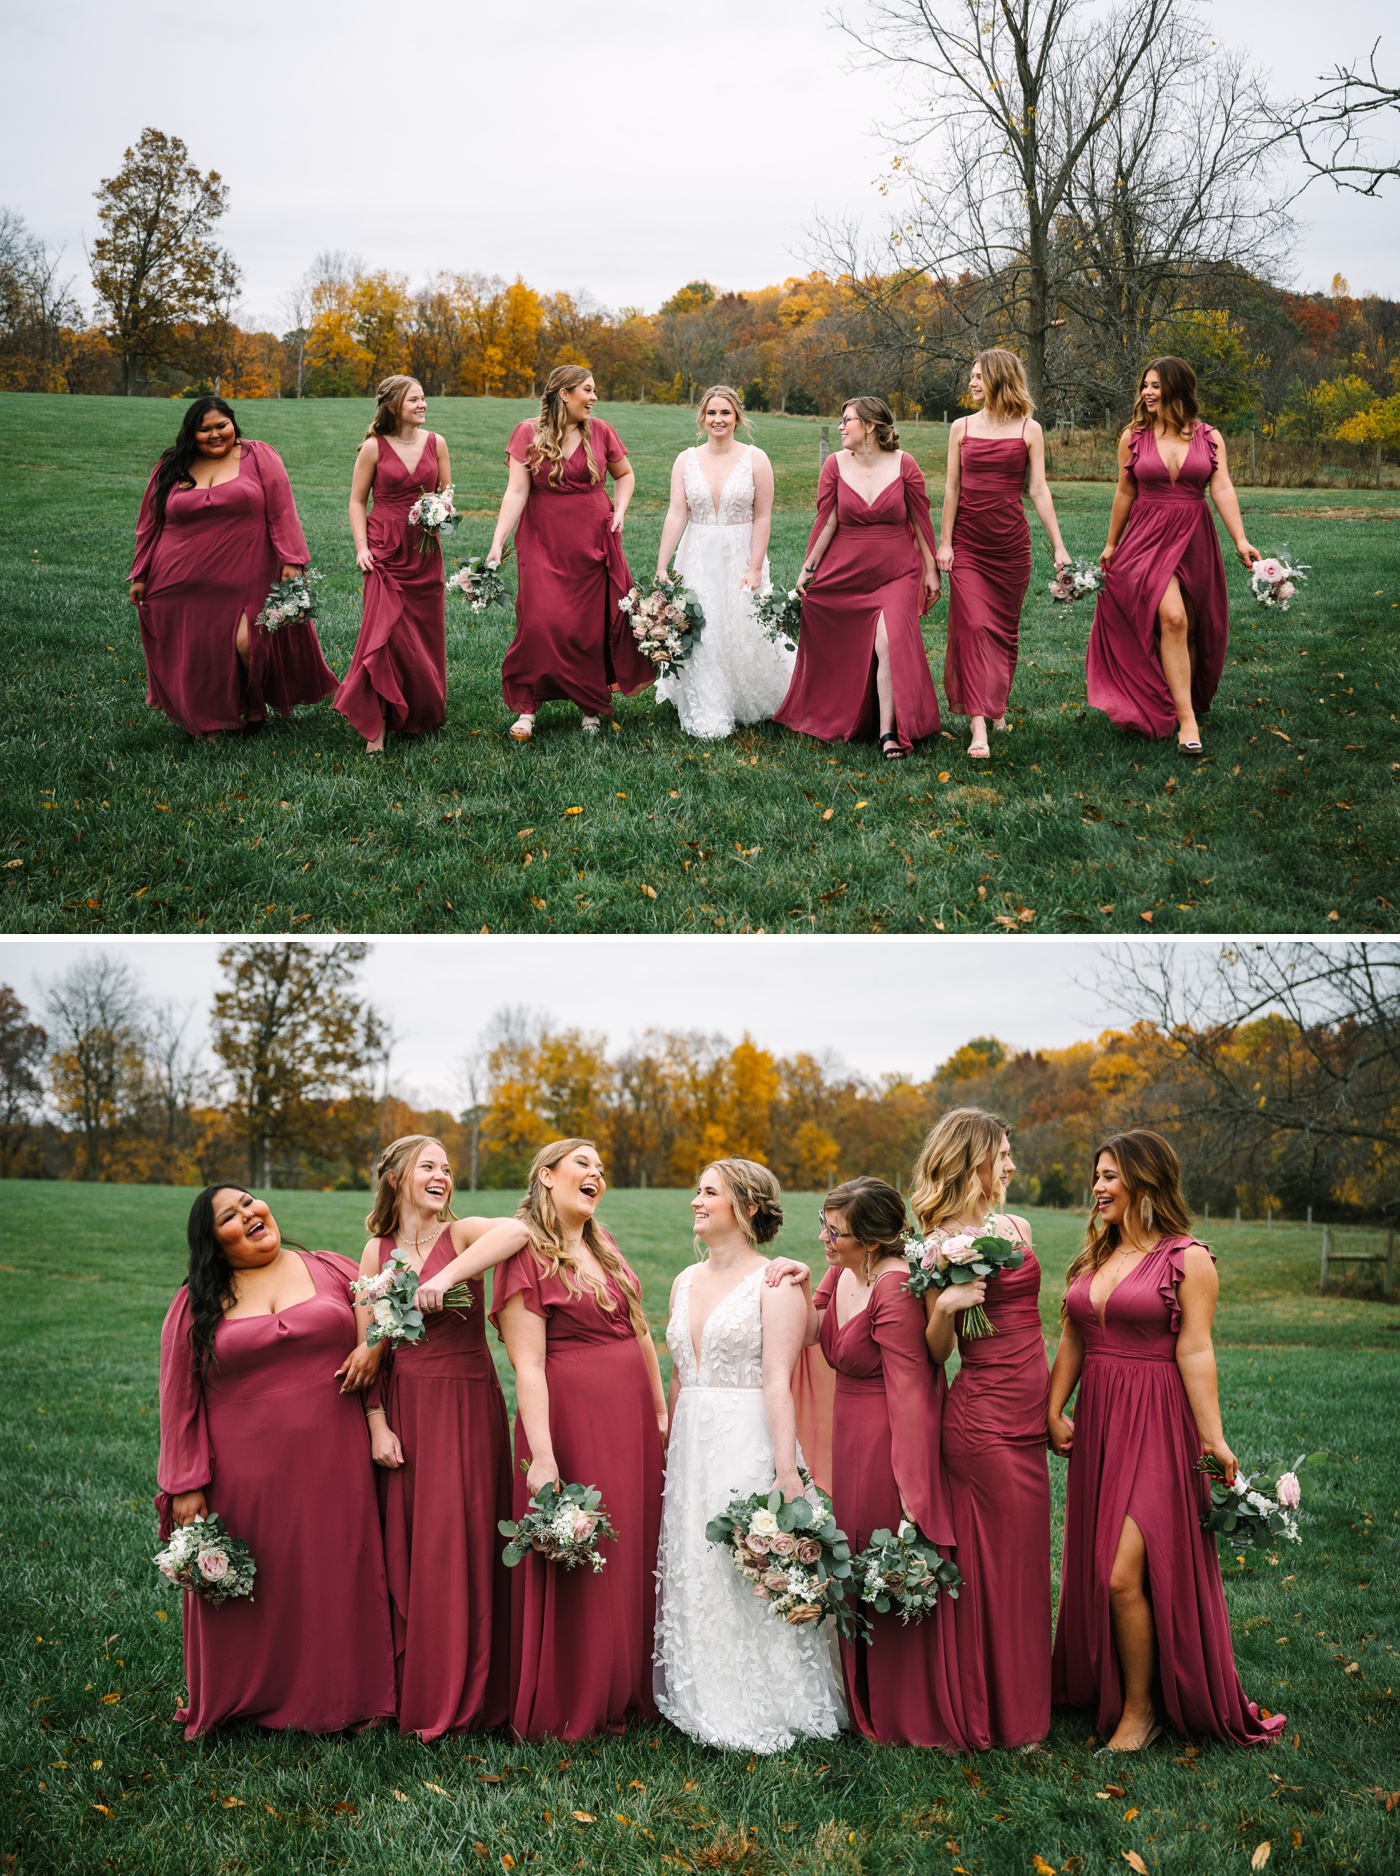 Bridal party portraits at Whippoorwill Hill